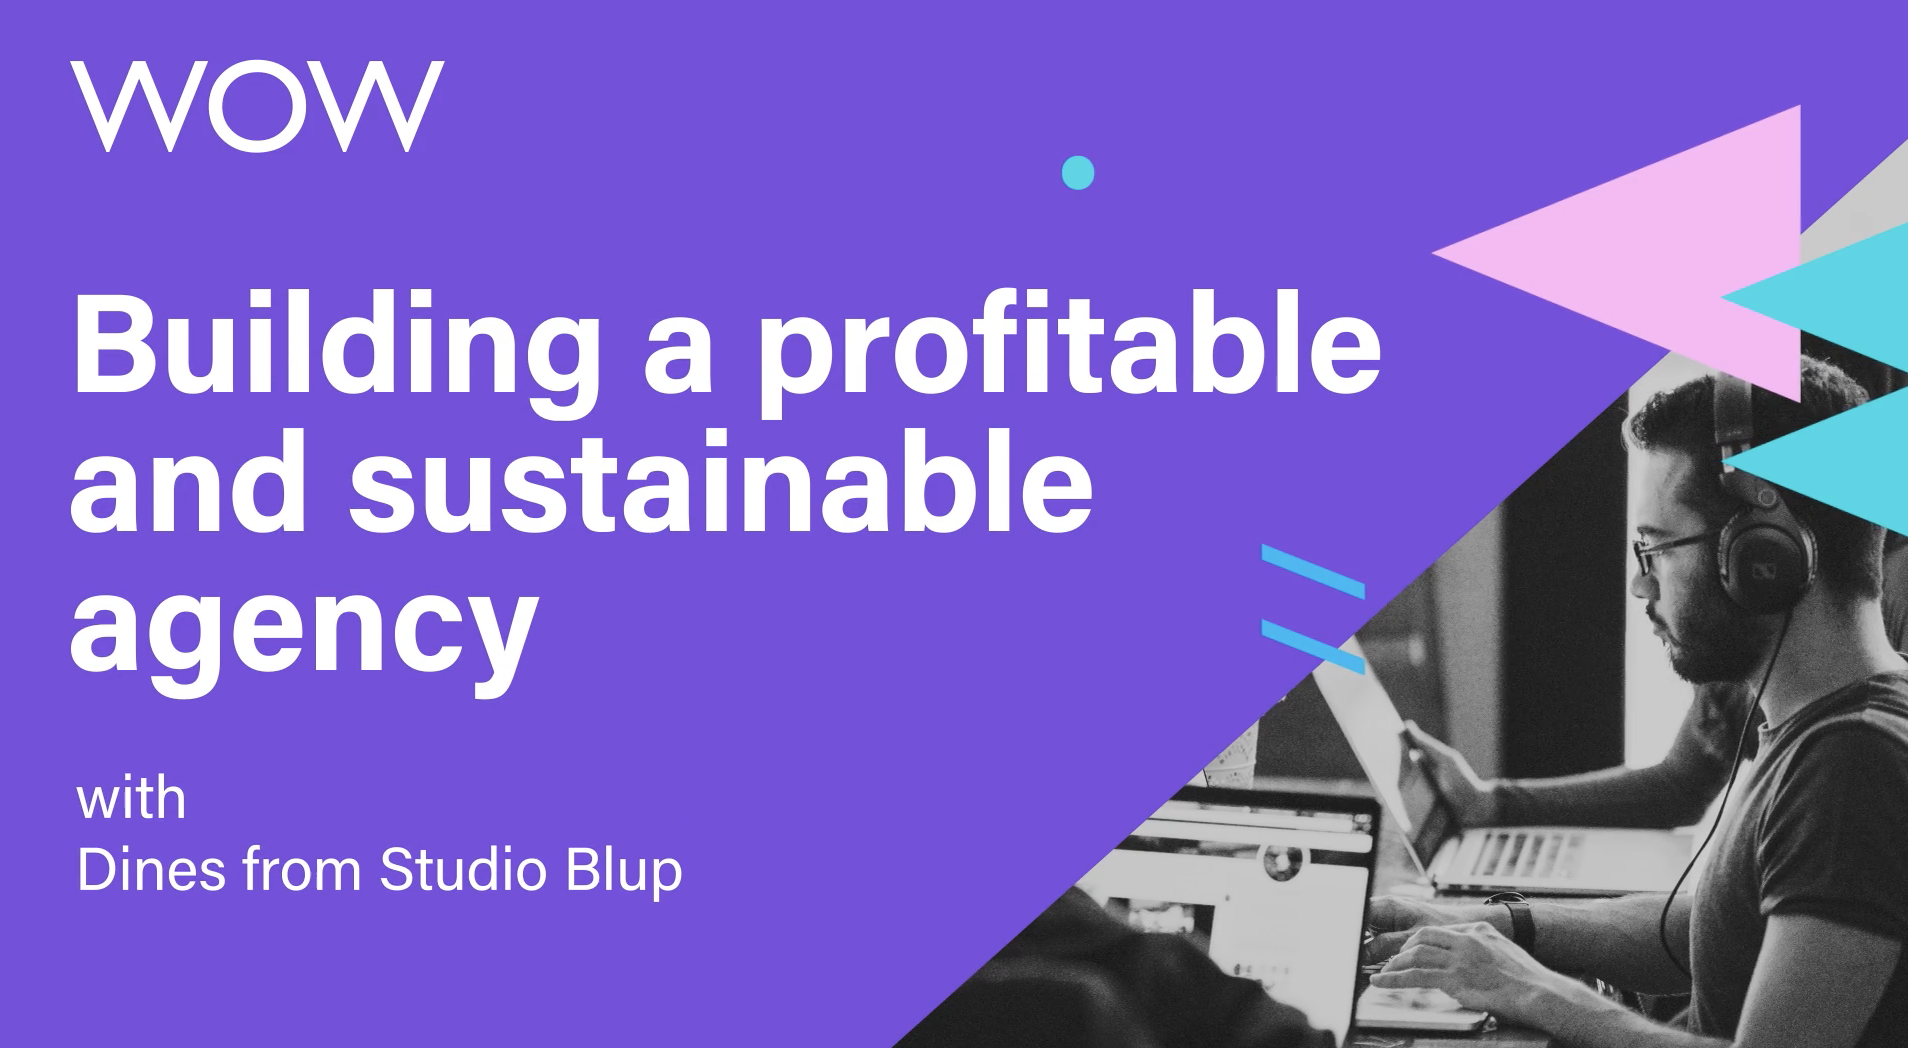 Dines from creative design agency Studio Blup on the Wow Company's webinar: building a profitable and sustainable agency.